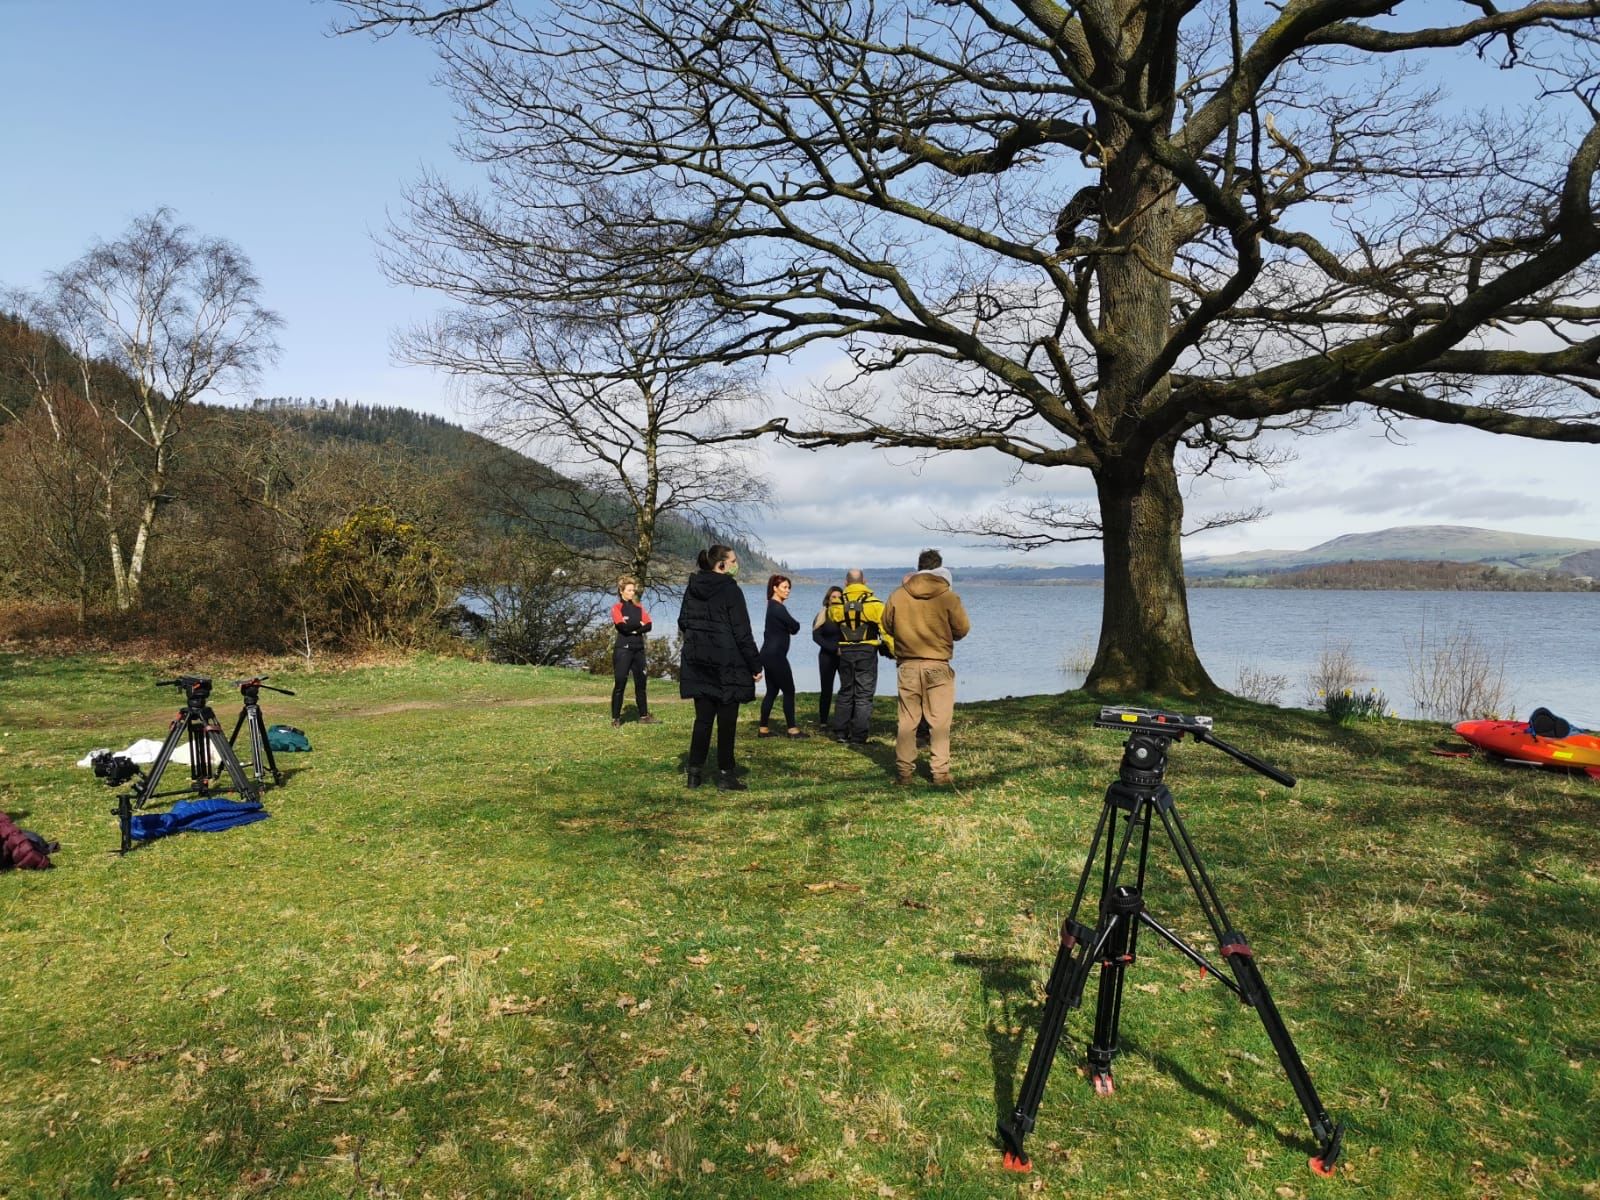 Behind the scenes at Bassenthwaite Lake for The Real Housewives of Cheshire